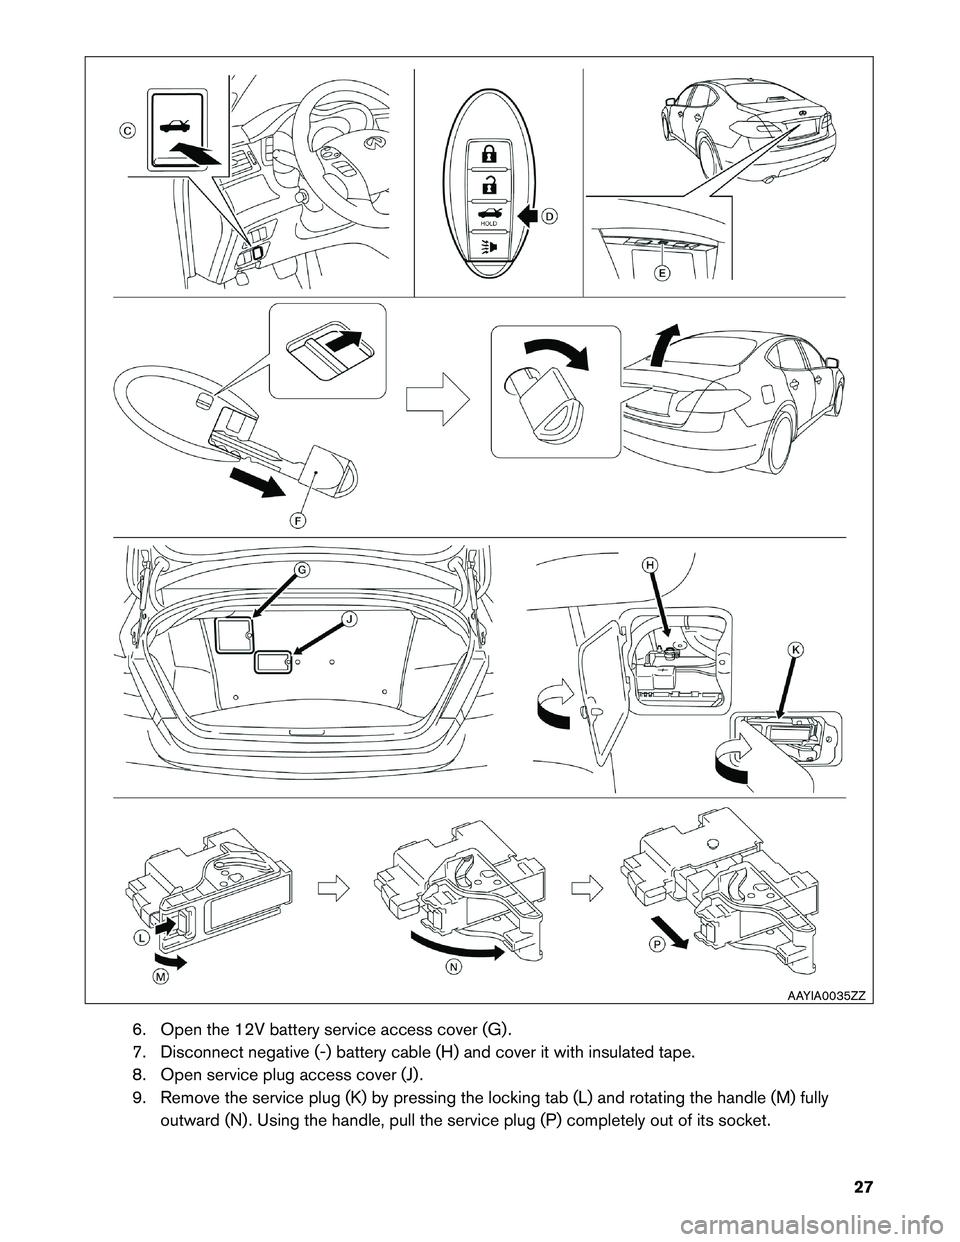 INFINITI M HYBRID 2013  First responder´s Guide 6. Open the 12V battery service access cover (G) .
7.
Disconnect negative (-) battery cable (H) and cover it with insulated tape.
8. Open service plug access cover (J) .
9. Remove the service plug (K)